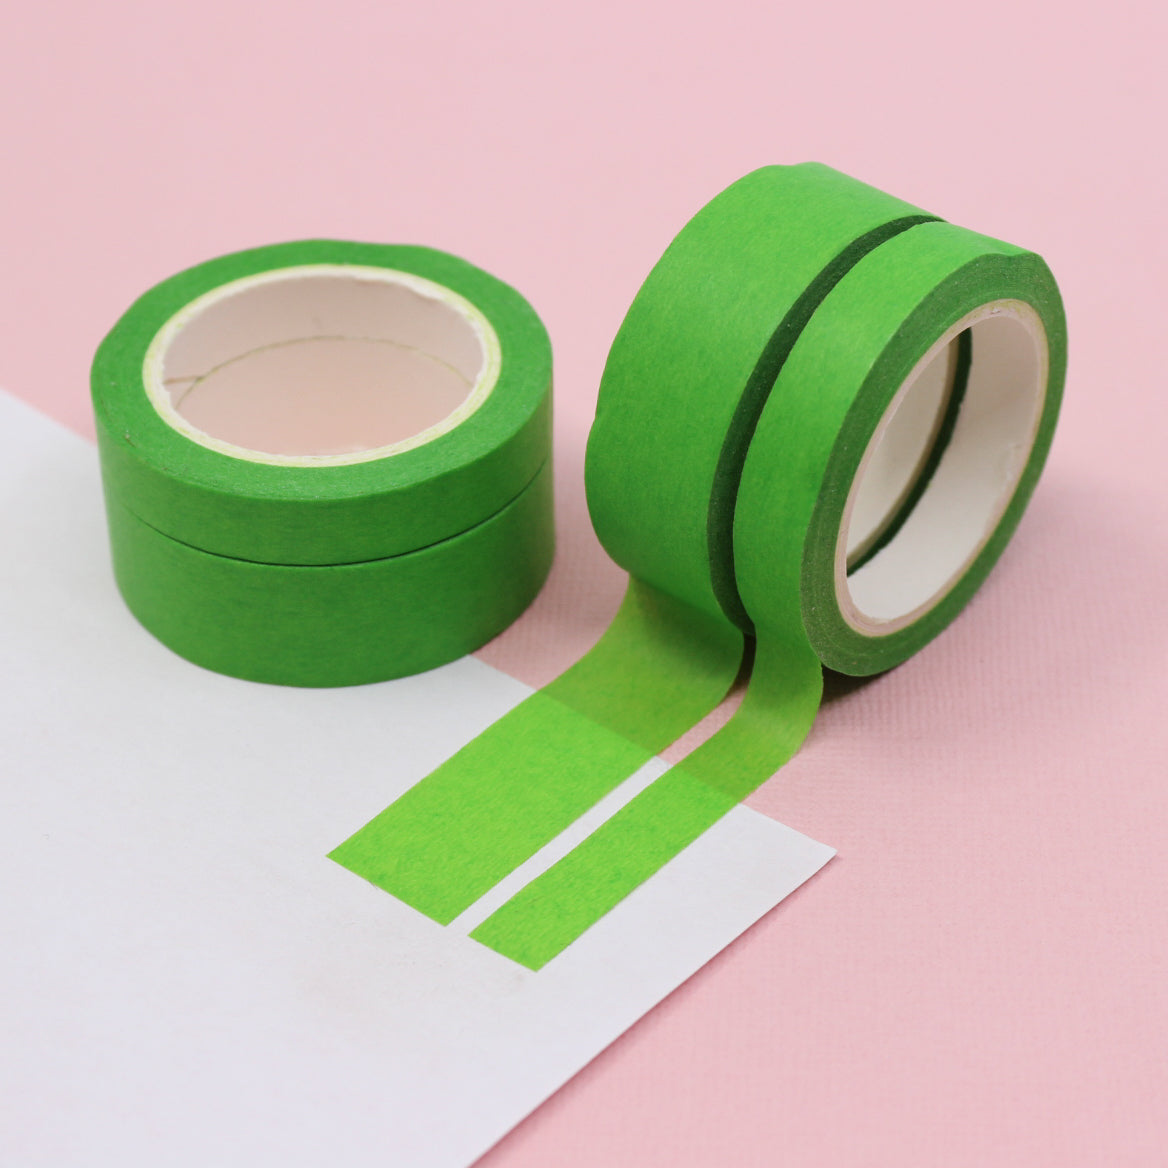 This primary green solid washi tape is vibrant and fun. This washi tape is part of our solid neon thick-thin matching duo washi collection. Find the perfect color for any project in BBB Supplies' thick-thin solids collection, from neon to neutral to pastel and more. This tape is sold at BBB Supplies Craft Shop.